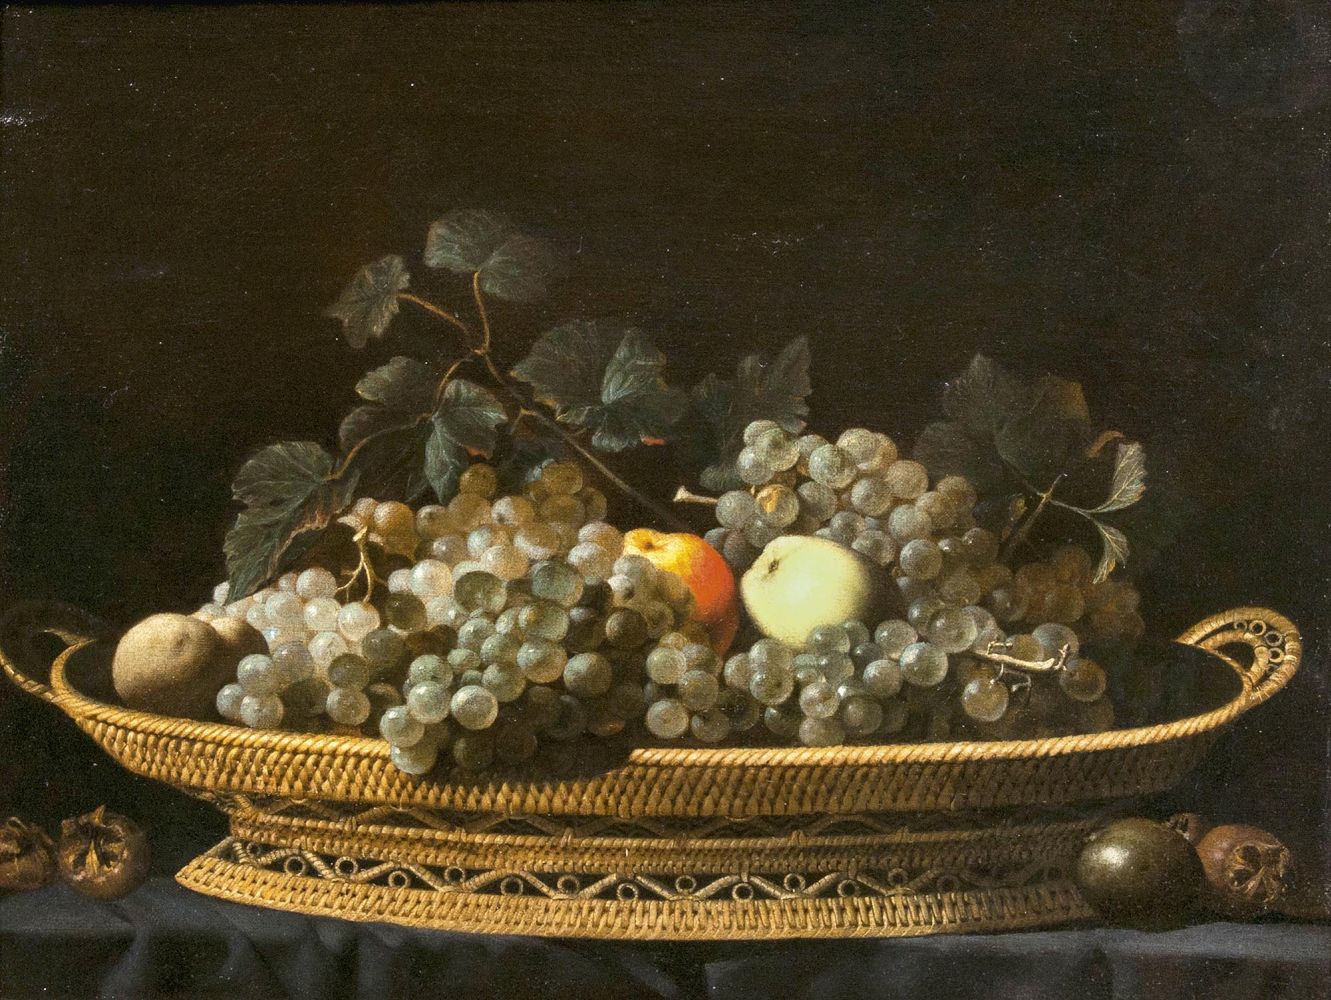 Fruits in a Basket